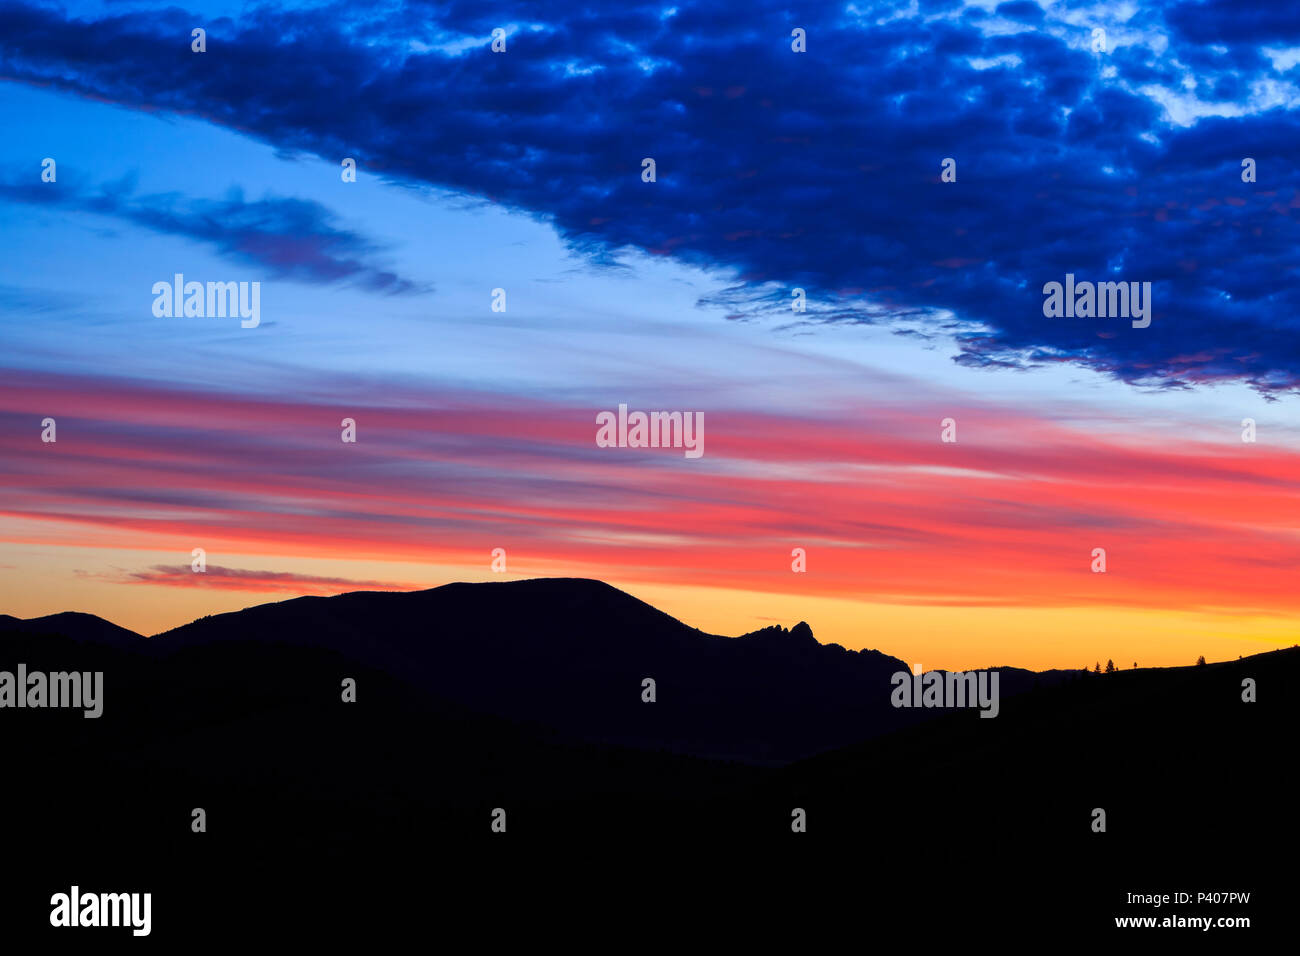 Sleeping Giant Mountain High Resolution Stock Photography and Images ...